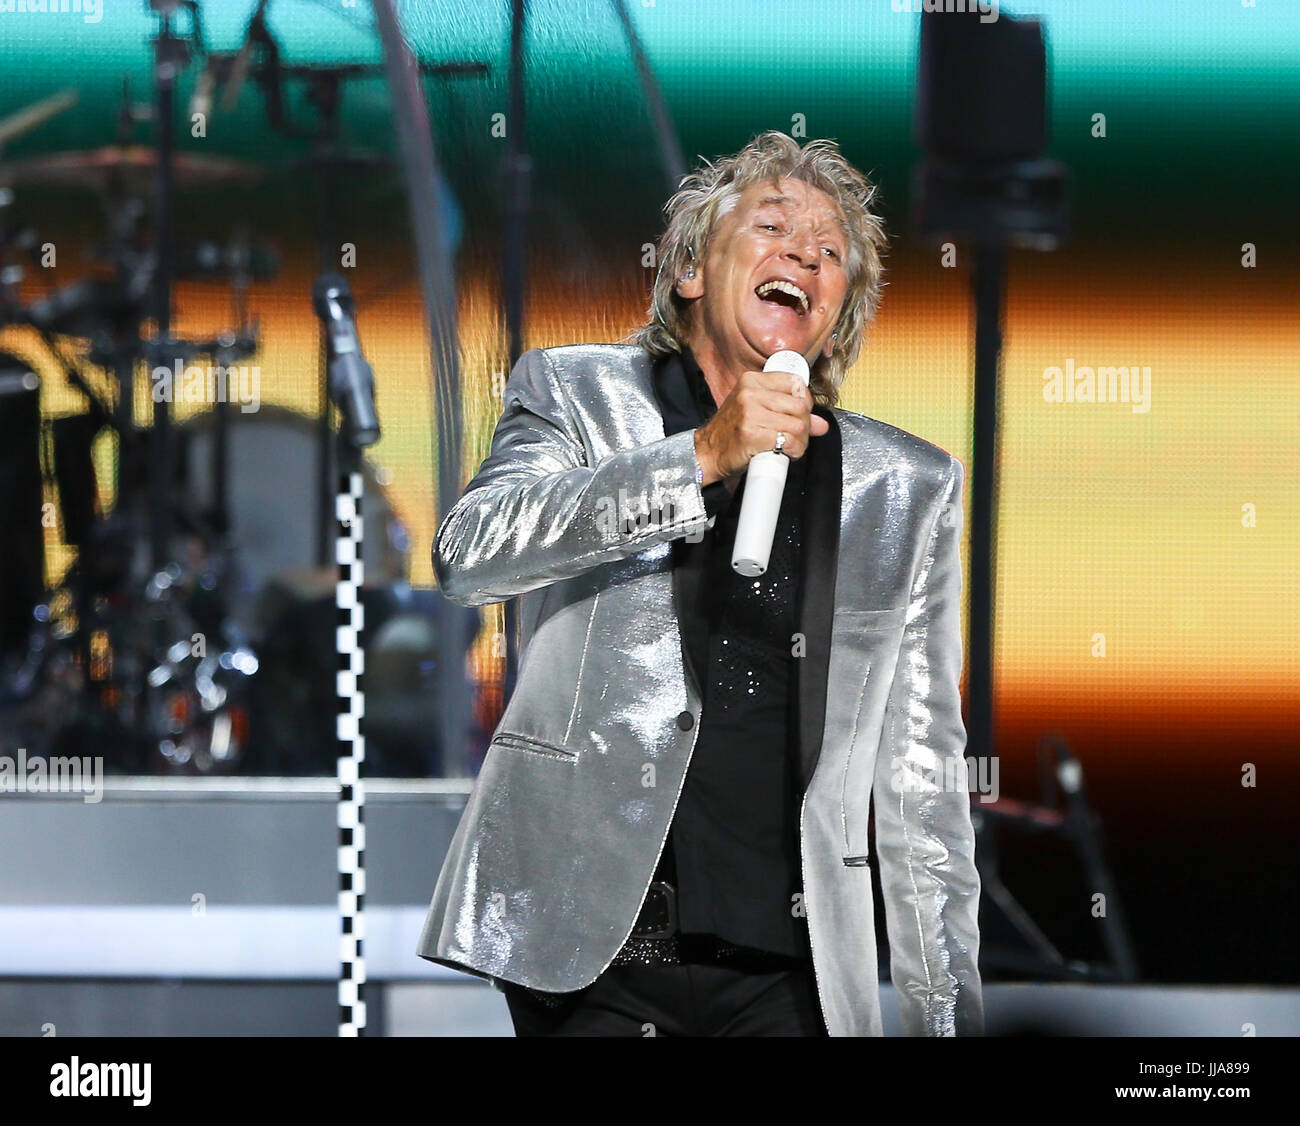 New York, USA . 18th July, 2017. Rod Stewart performs in concert at Northwell Health at Jones Beach Theater on July 18, 2017 in Wantagh, New York. Credit: AKPhoto/Alamy Live News Stock Photo